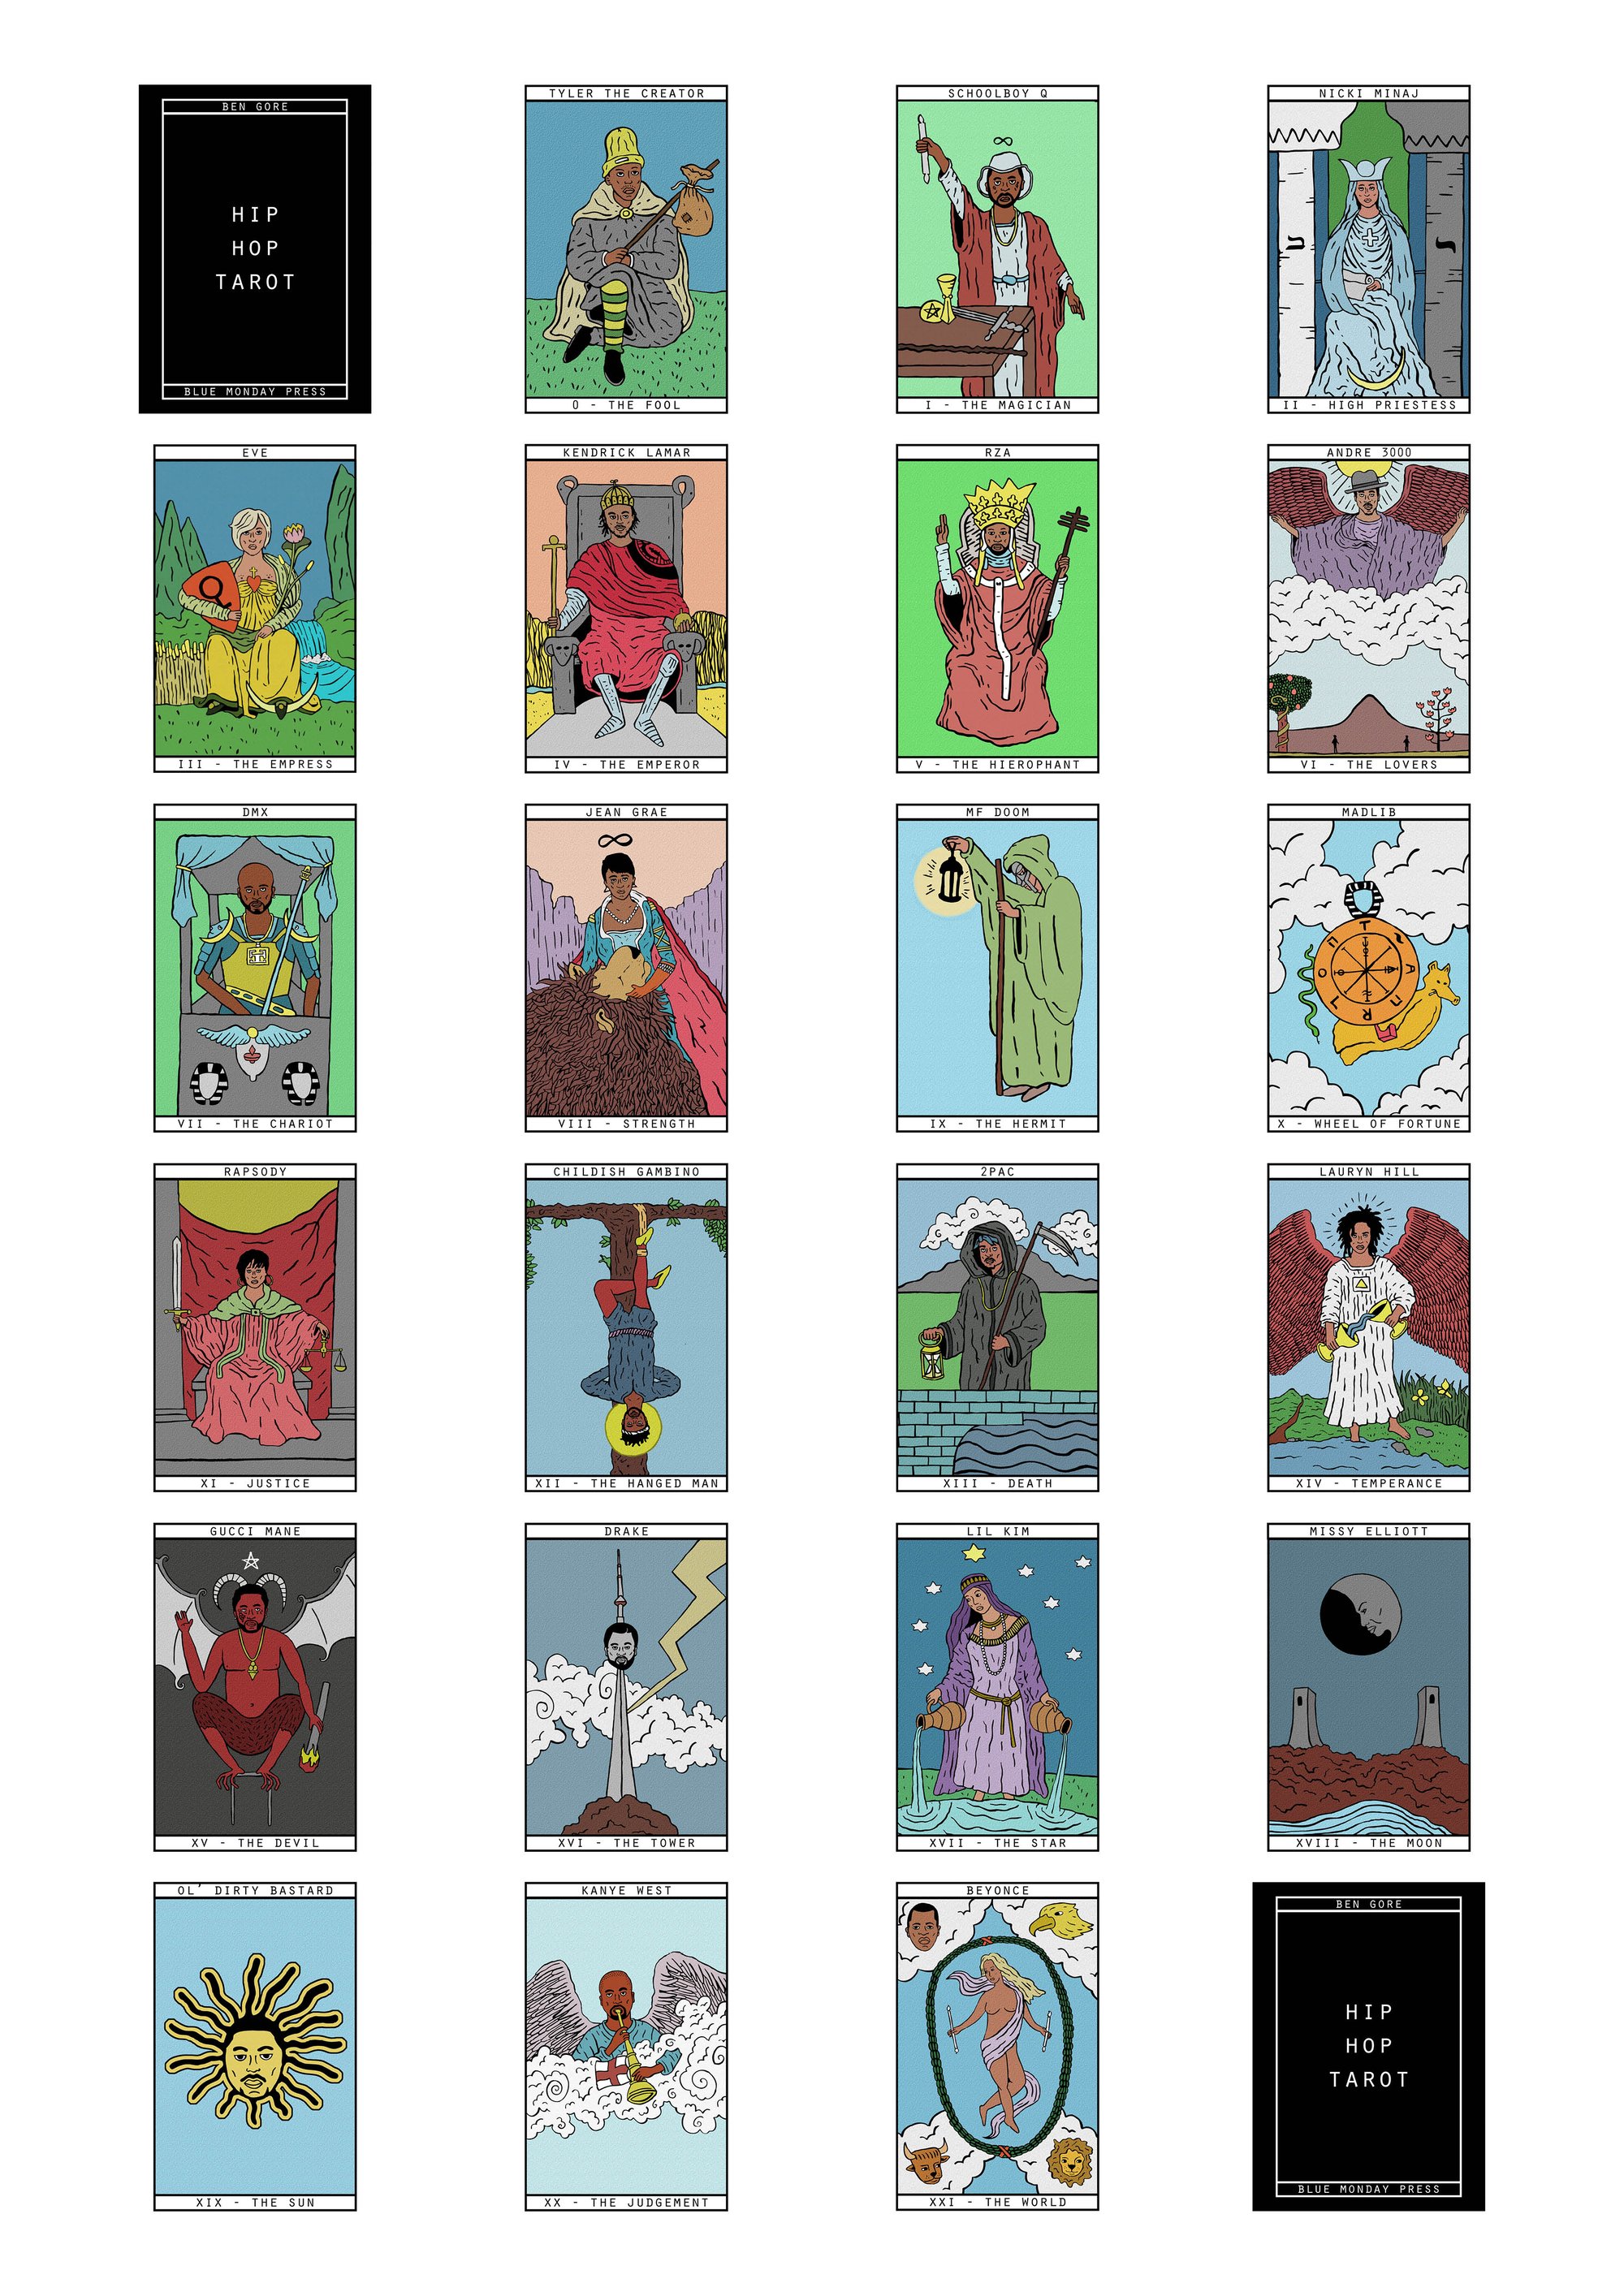 Tarot Cards for Beginners: How to Read Tarot and Where to Buy Decks